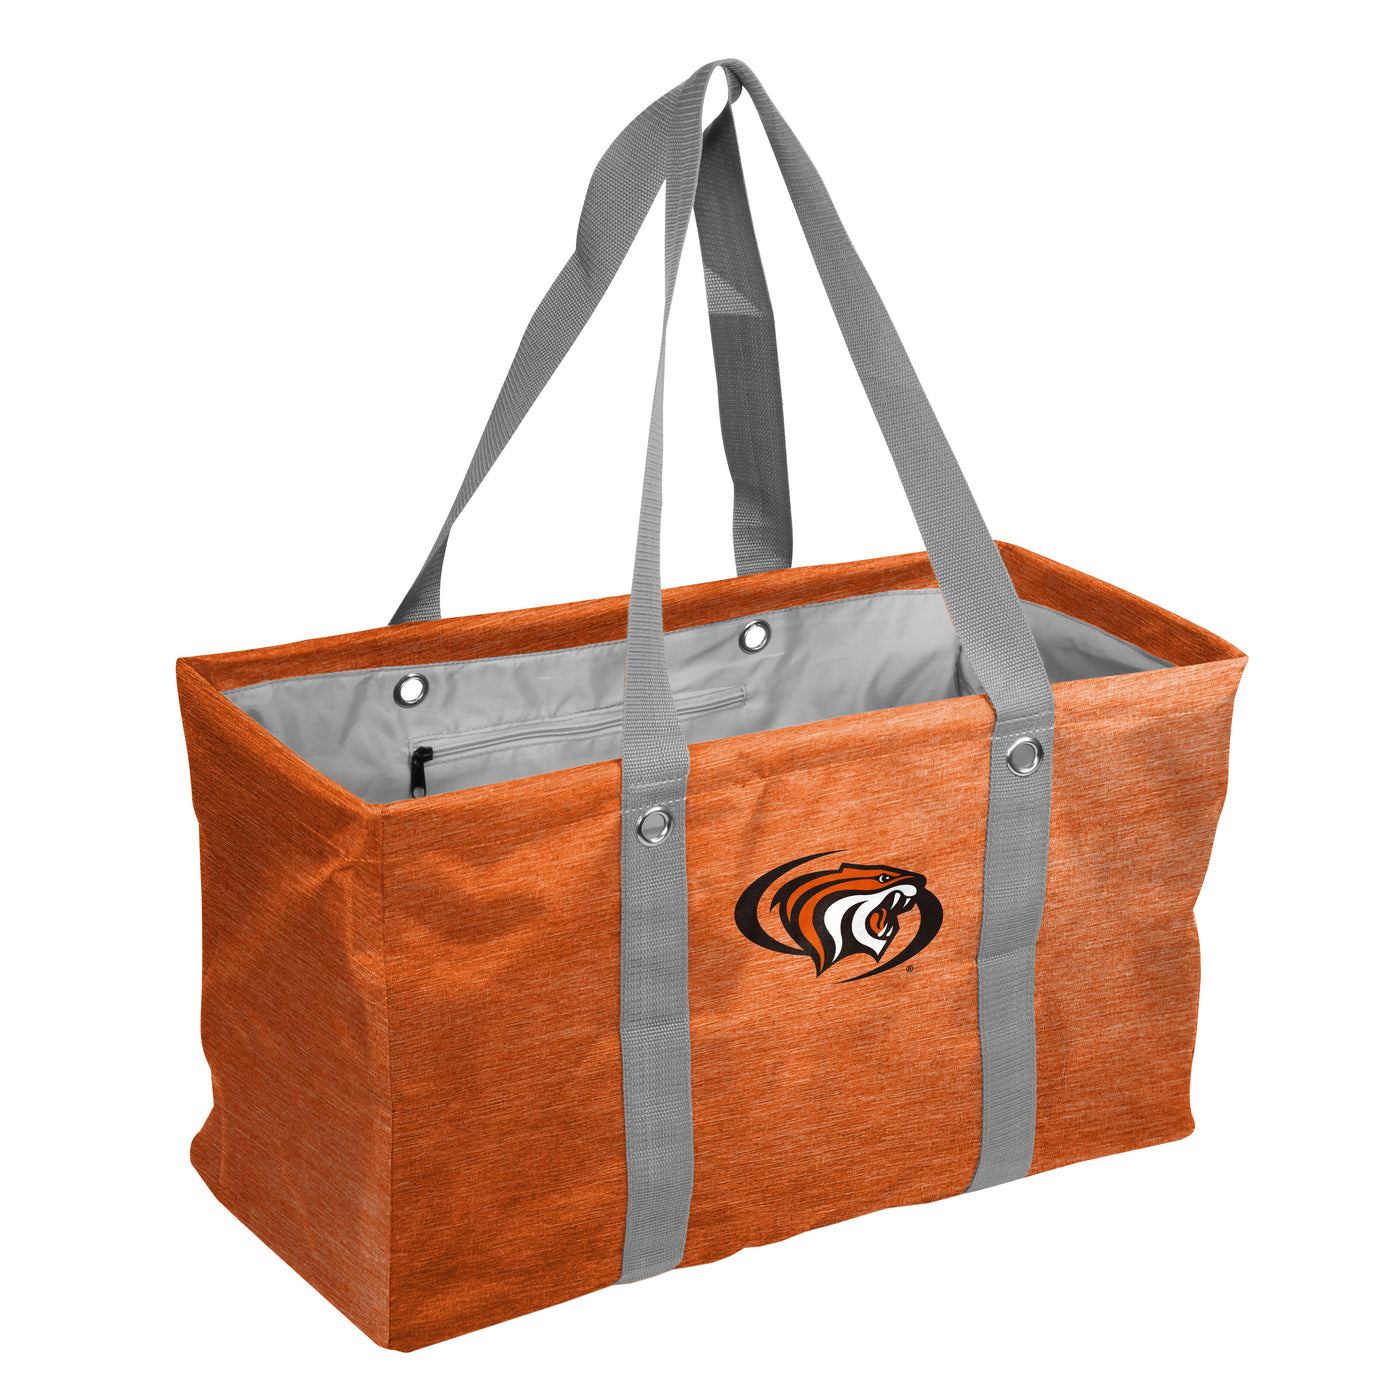 U of the Pacific - Cal Picnic Caddy